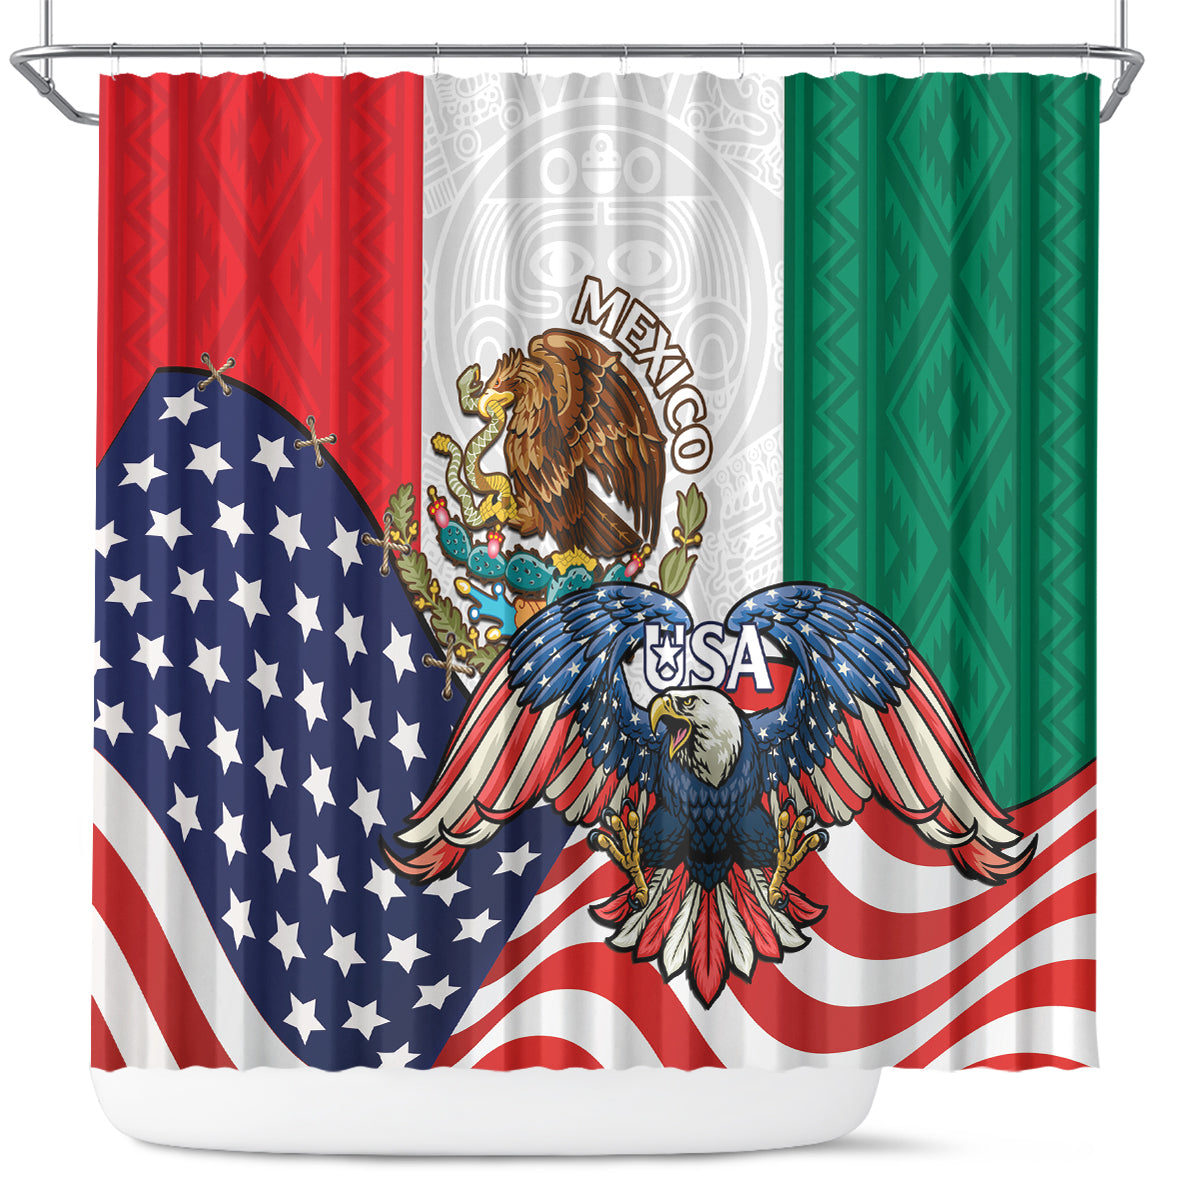 United States And Mexico Shower Curtain USA Eagle With Mexican Aztec